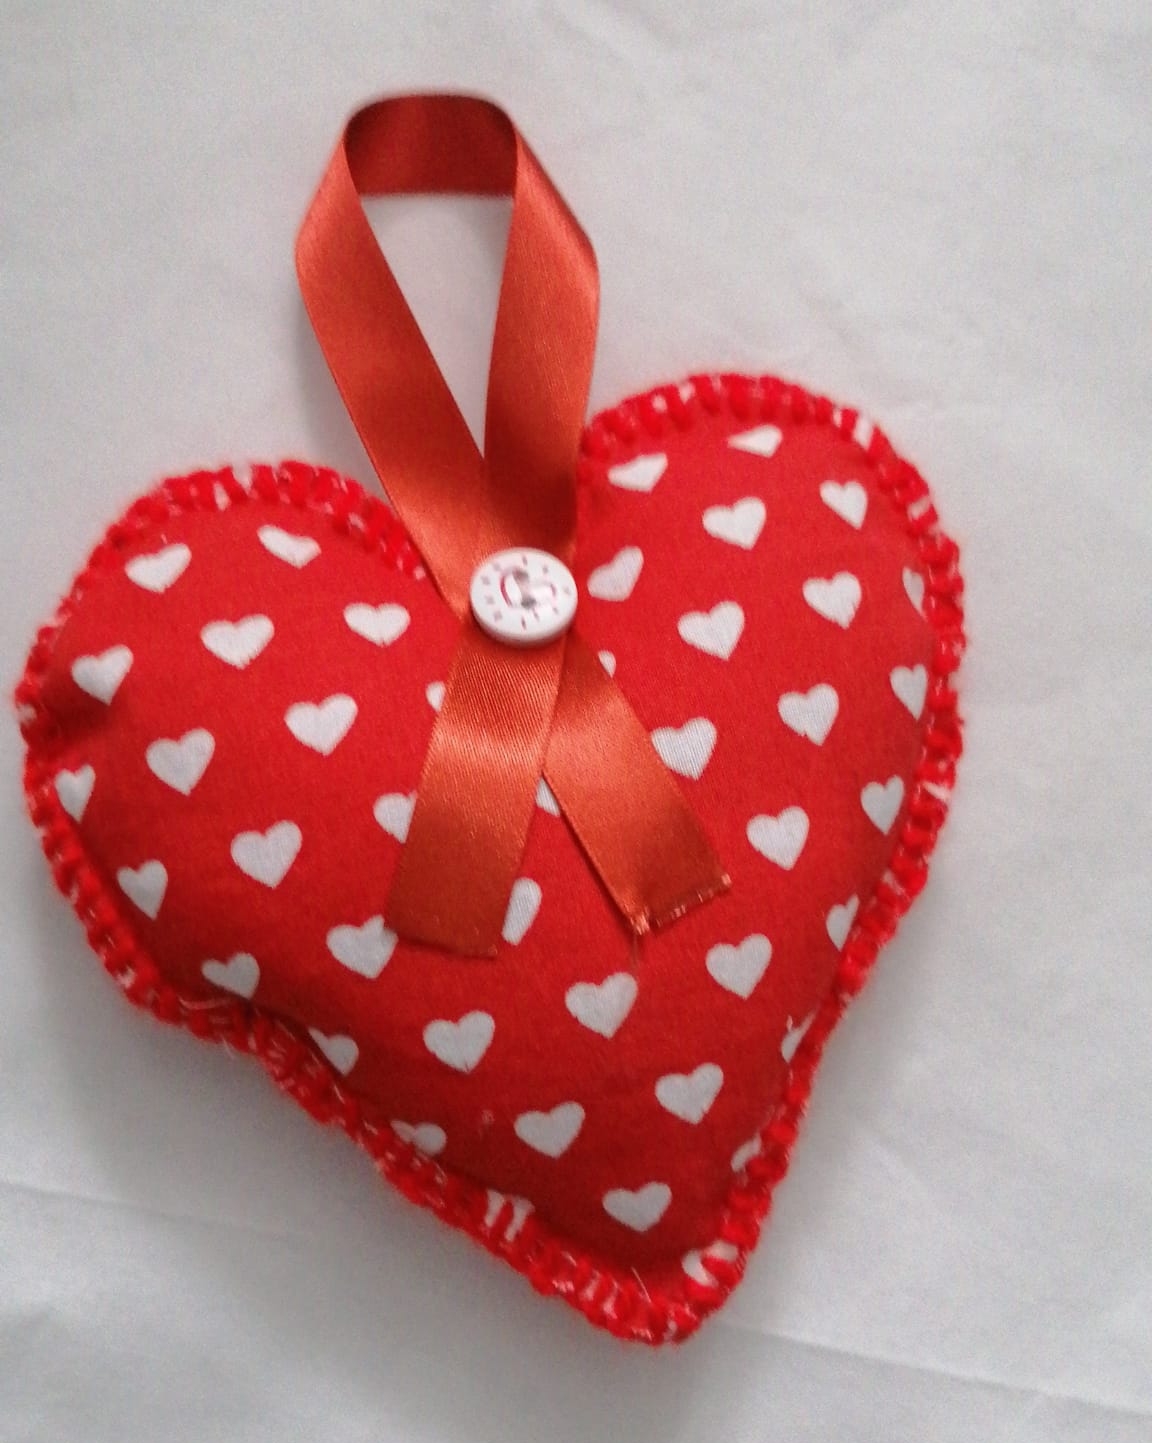 A small, red, heart-shaped pillow dotted with white hearts